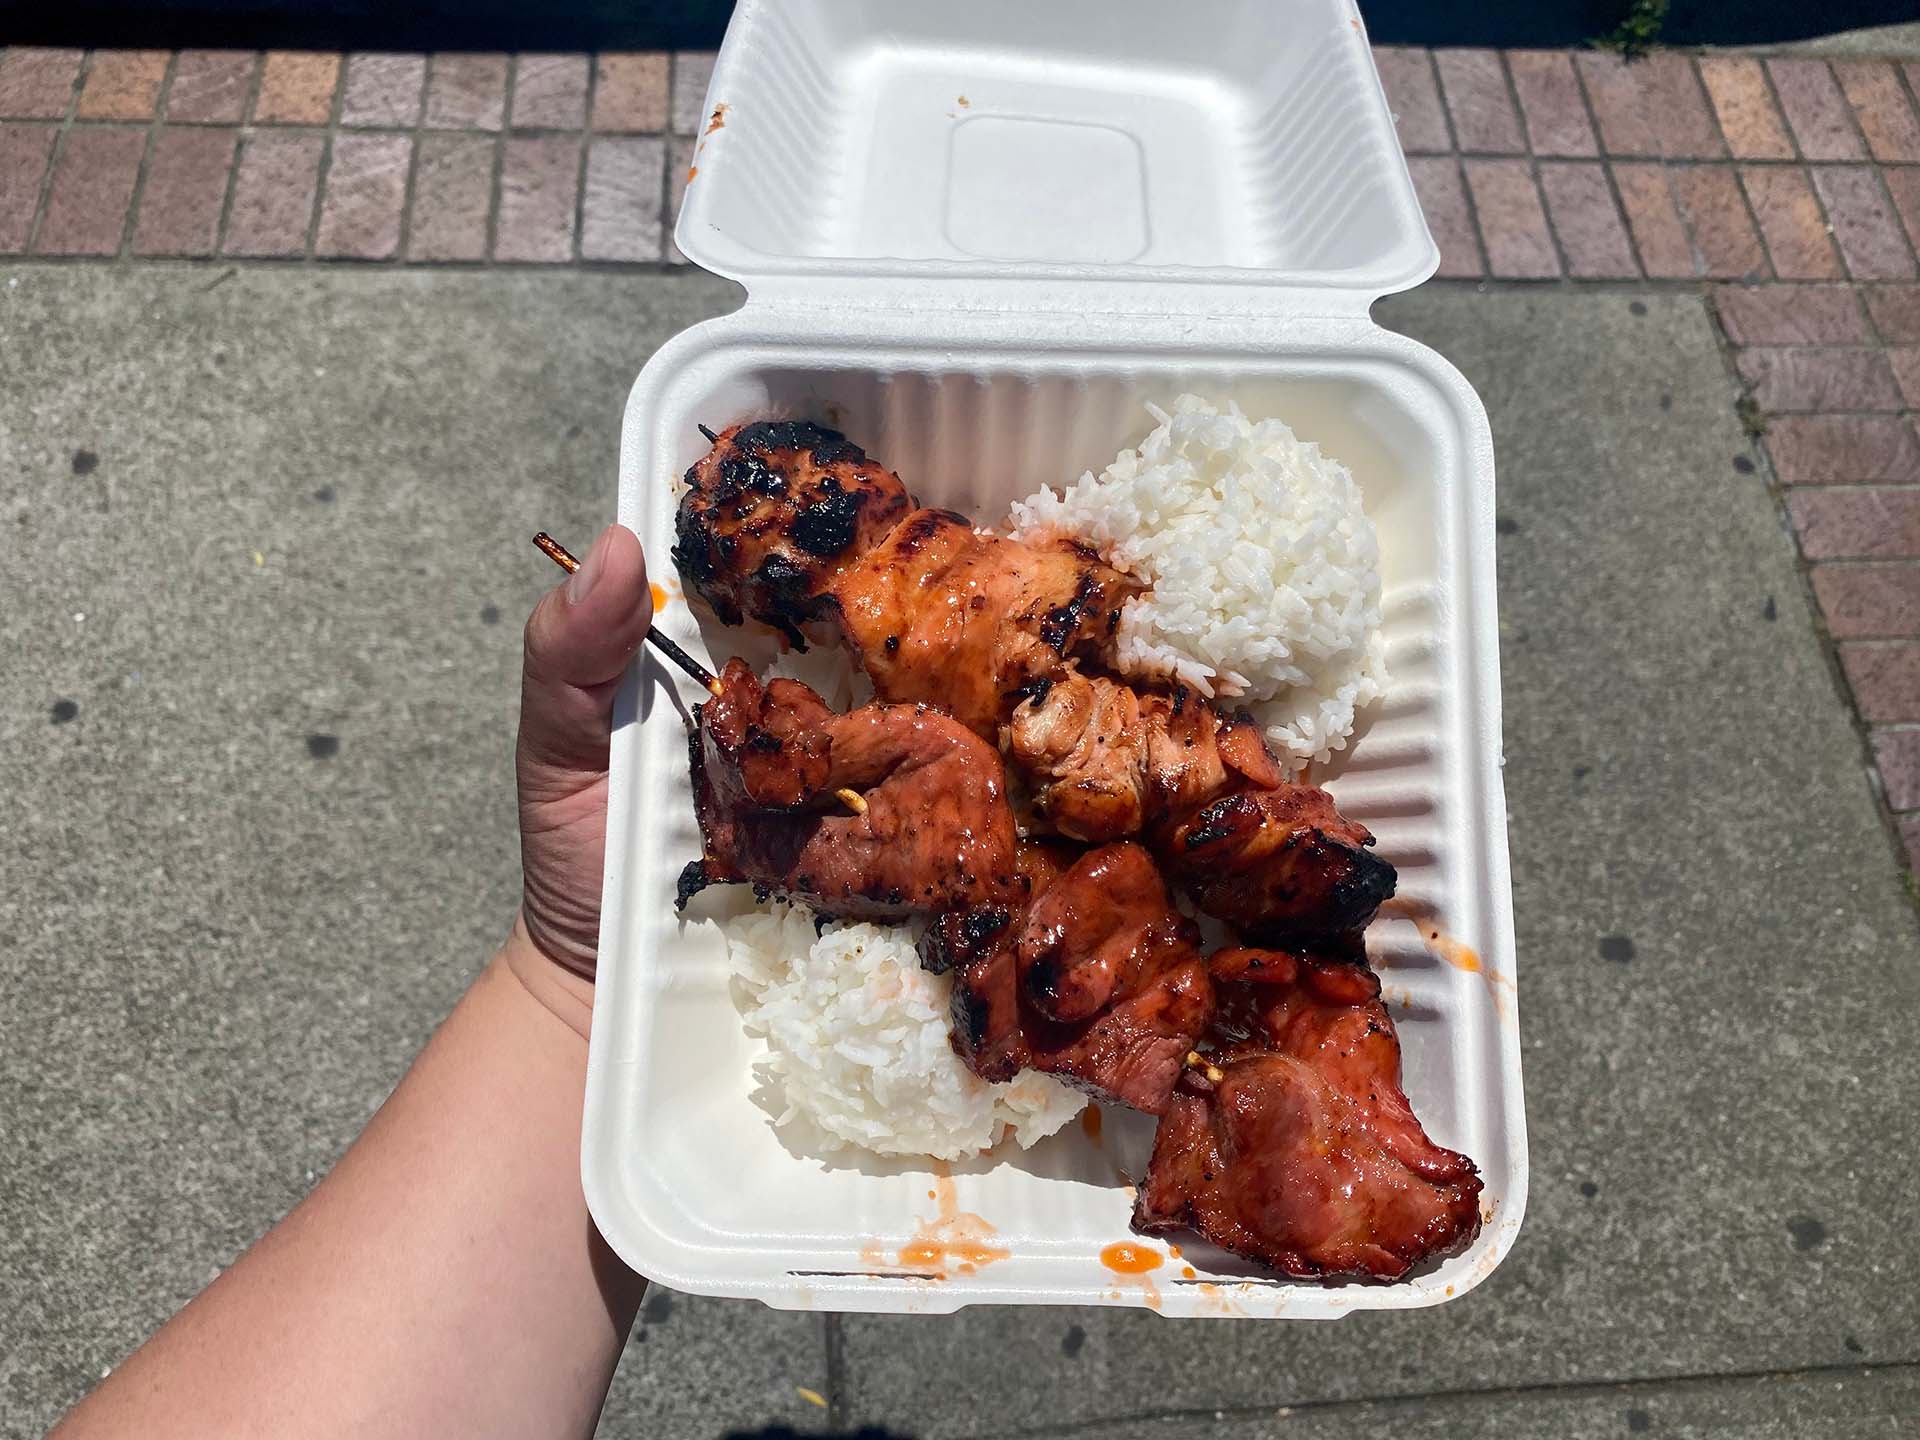 Hand holding a white plastic takeout container of saucy meat skewers arranged over a bed of white rice.